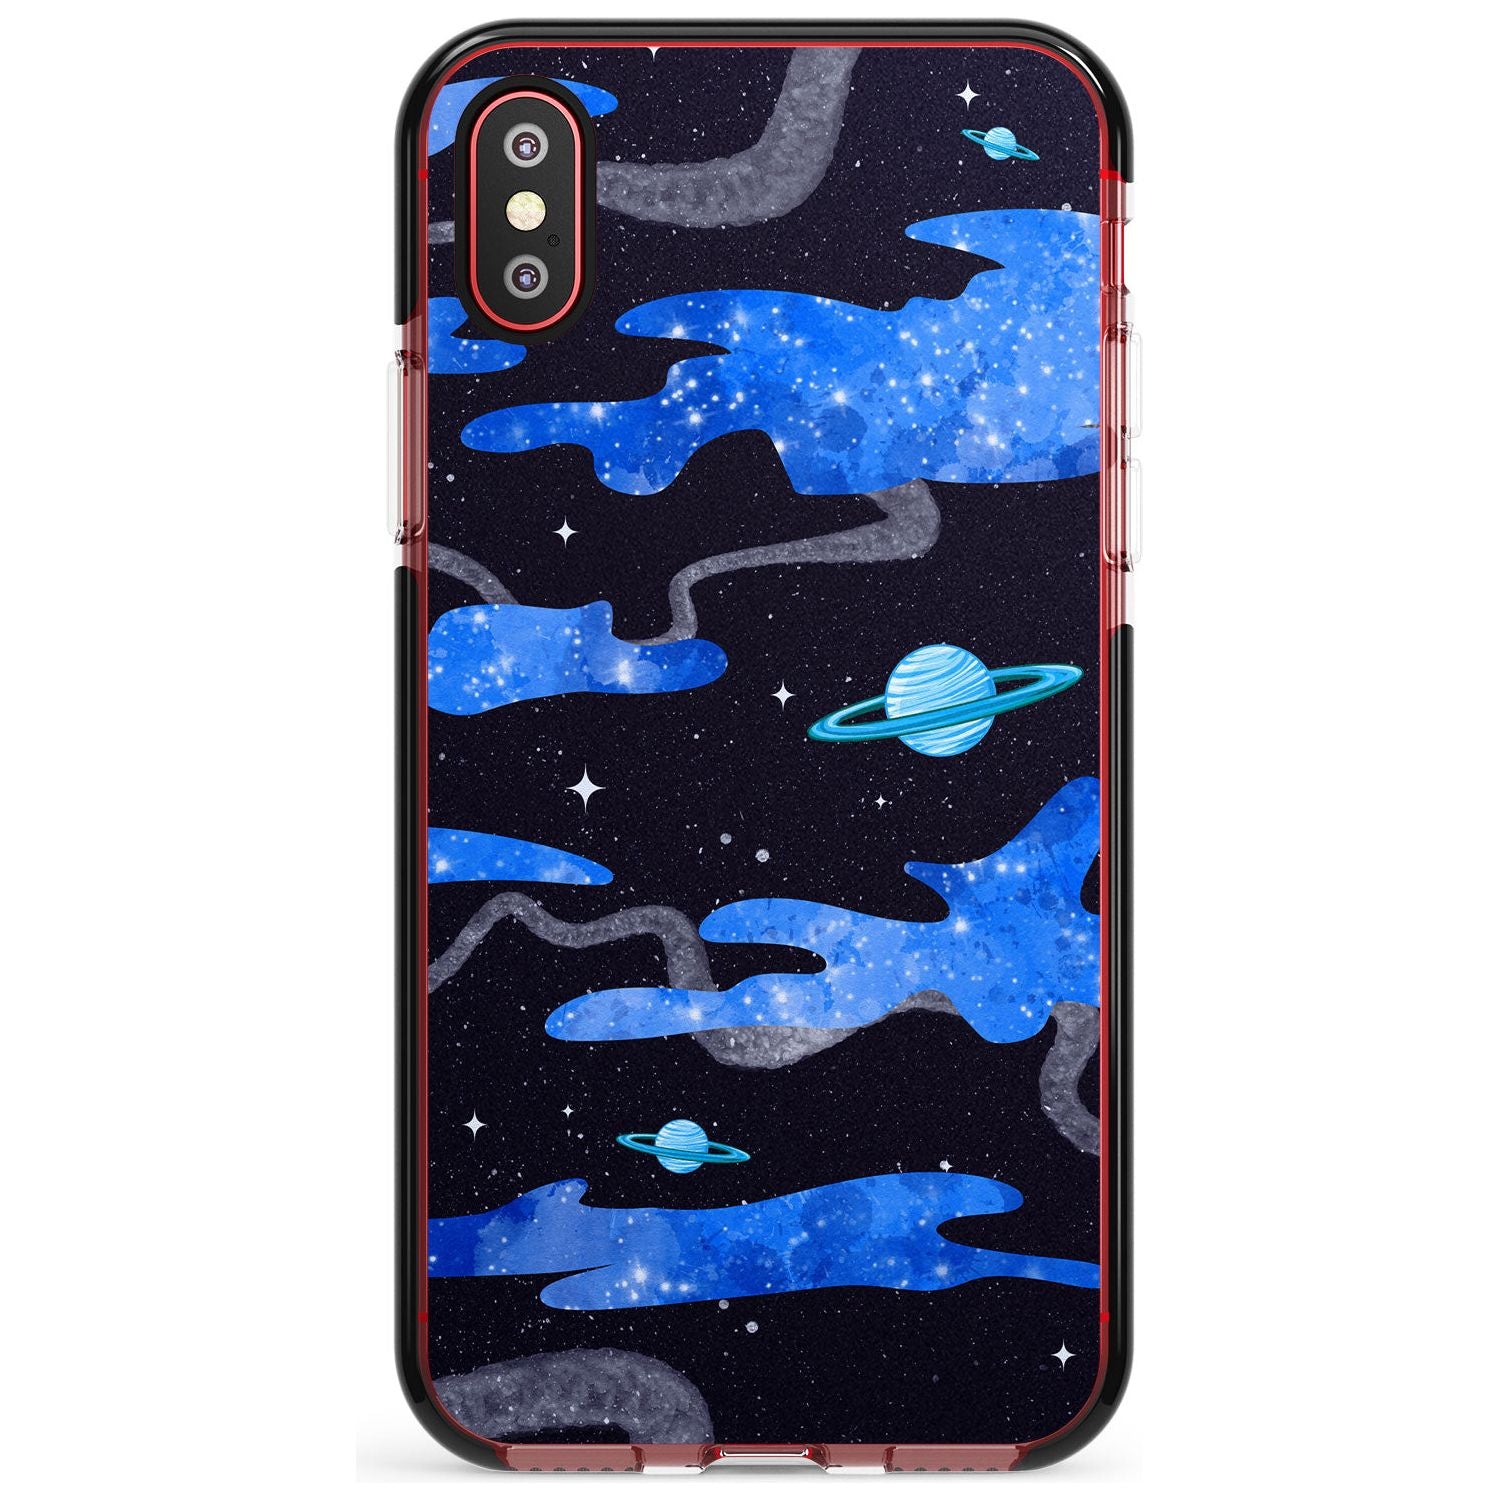 Blue Galaxy Black Impact Phone Case for iPhone X XS Max XR